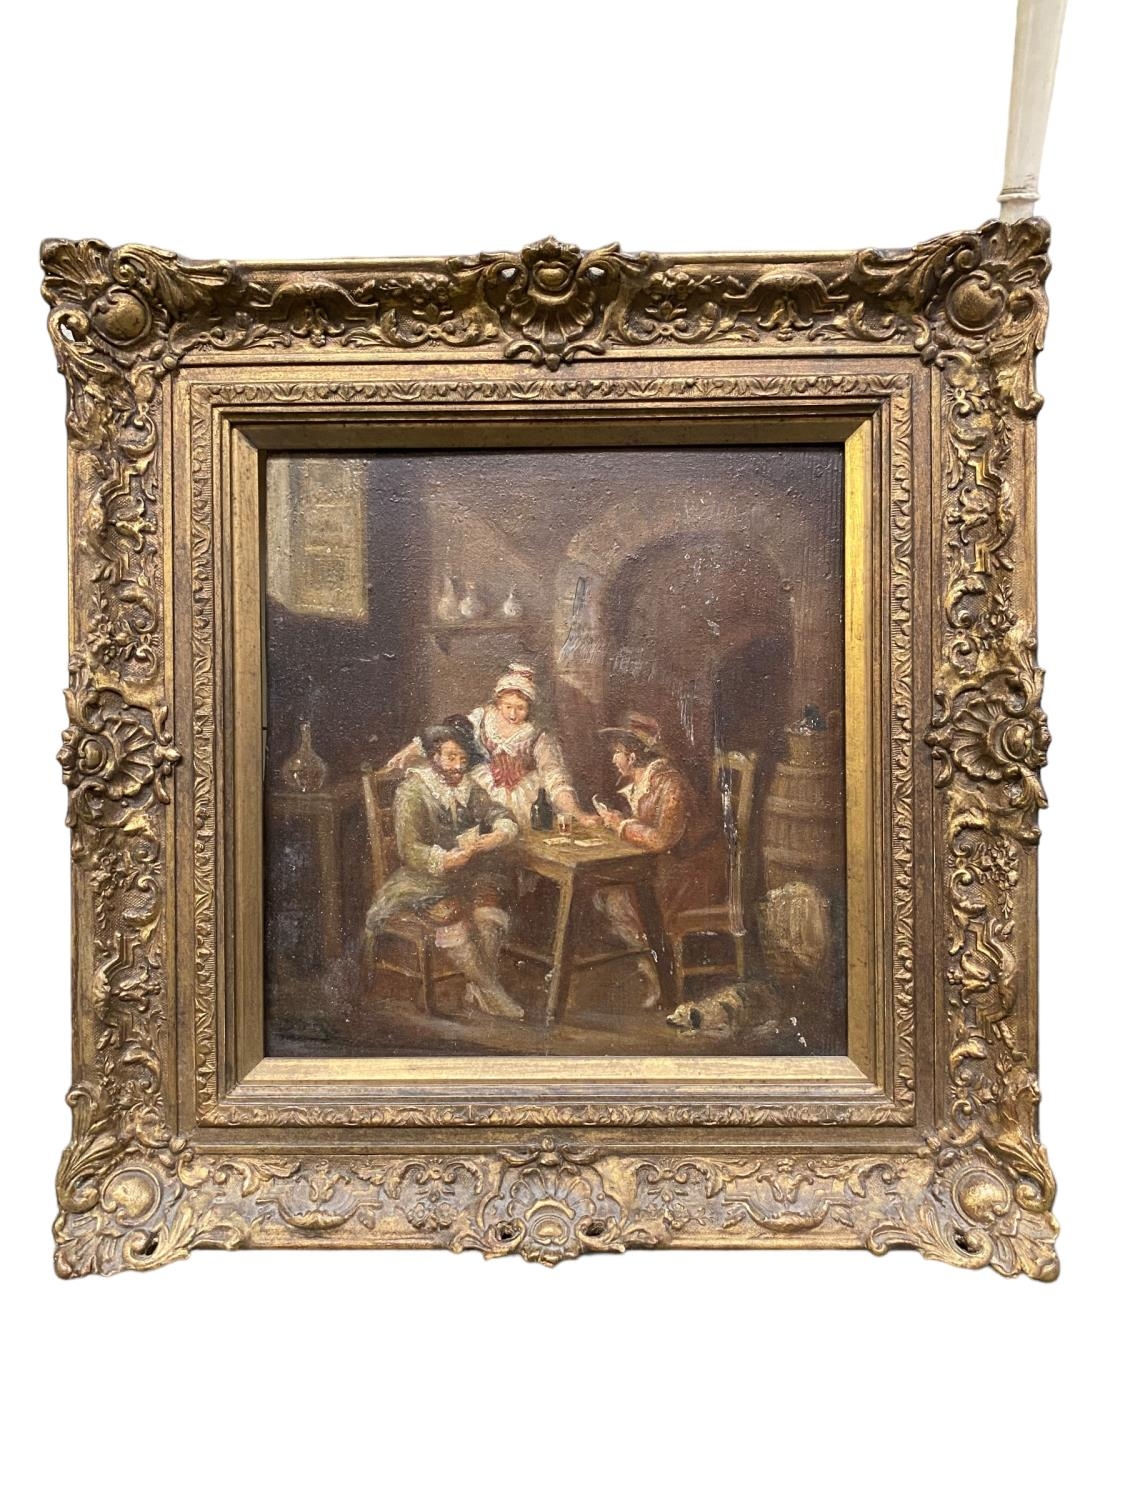 C19th oil on board of an interior tavern scene, in a unglazed gilt frame, 27 x 26cm - Image 4 of 6